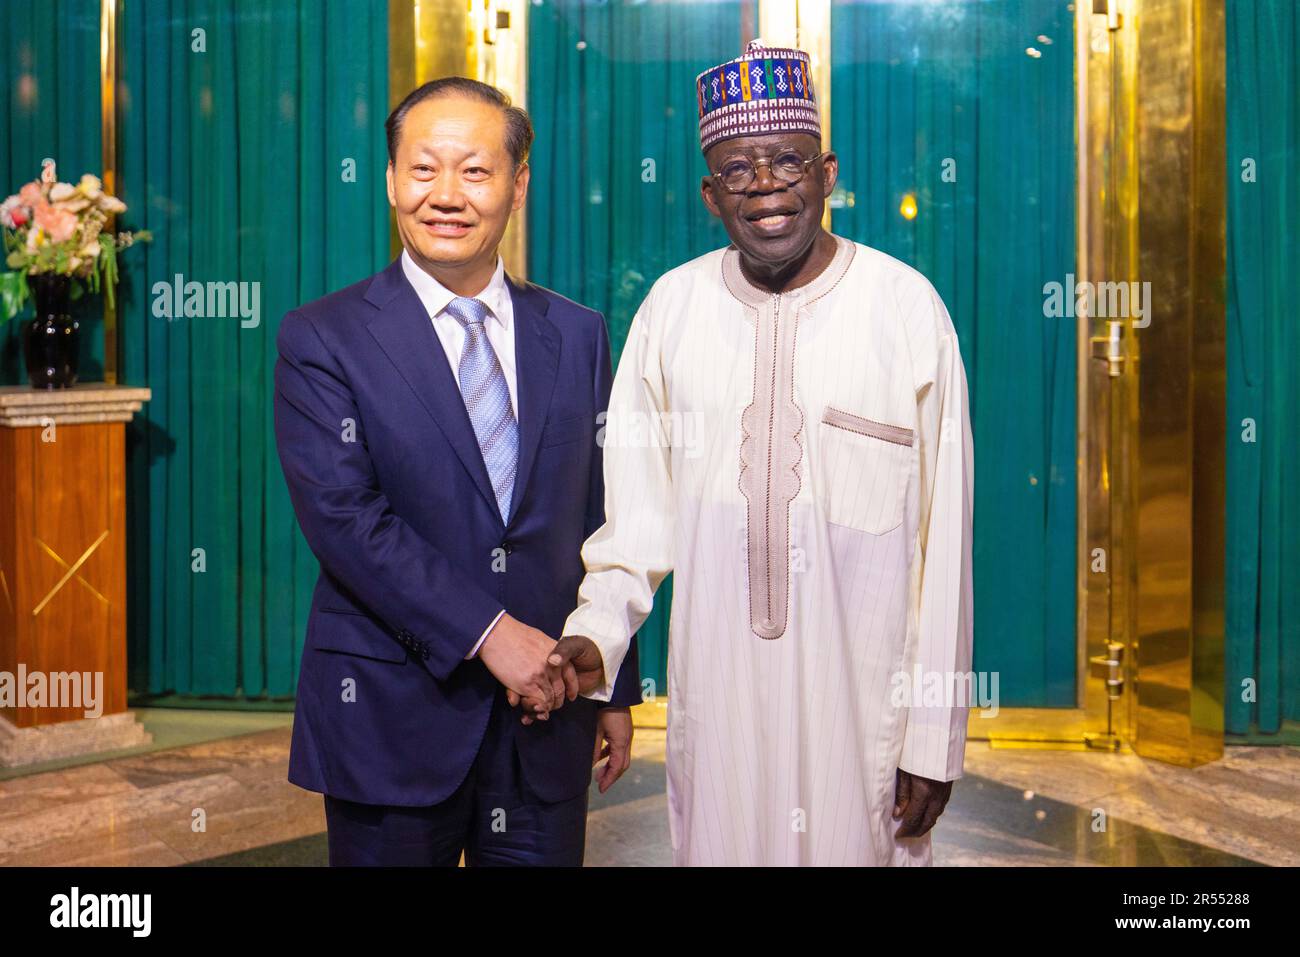 Abuja, Nigeria. 31st May, 2023. Nigerian President Bola Tinubu meets with Special Envoy of Chinese President Xi Jinping and Vice Chairman of the Standing Committee of the National People's Congress Peng Qinghua, in Abuja, Nigeria, on May 31, 2023. At the invitation of the government of the Federal Republic of Nigeria, Peng Qinghua attended Bola Tinubu's inauguration in Abuja on May 29. Credit: Nosa/Xinhua/Alamy Live News Stock Photo